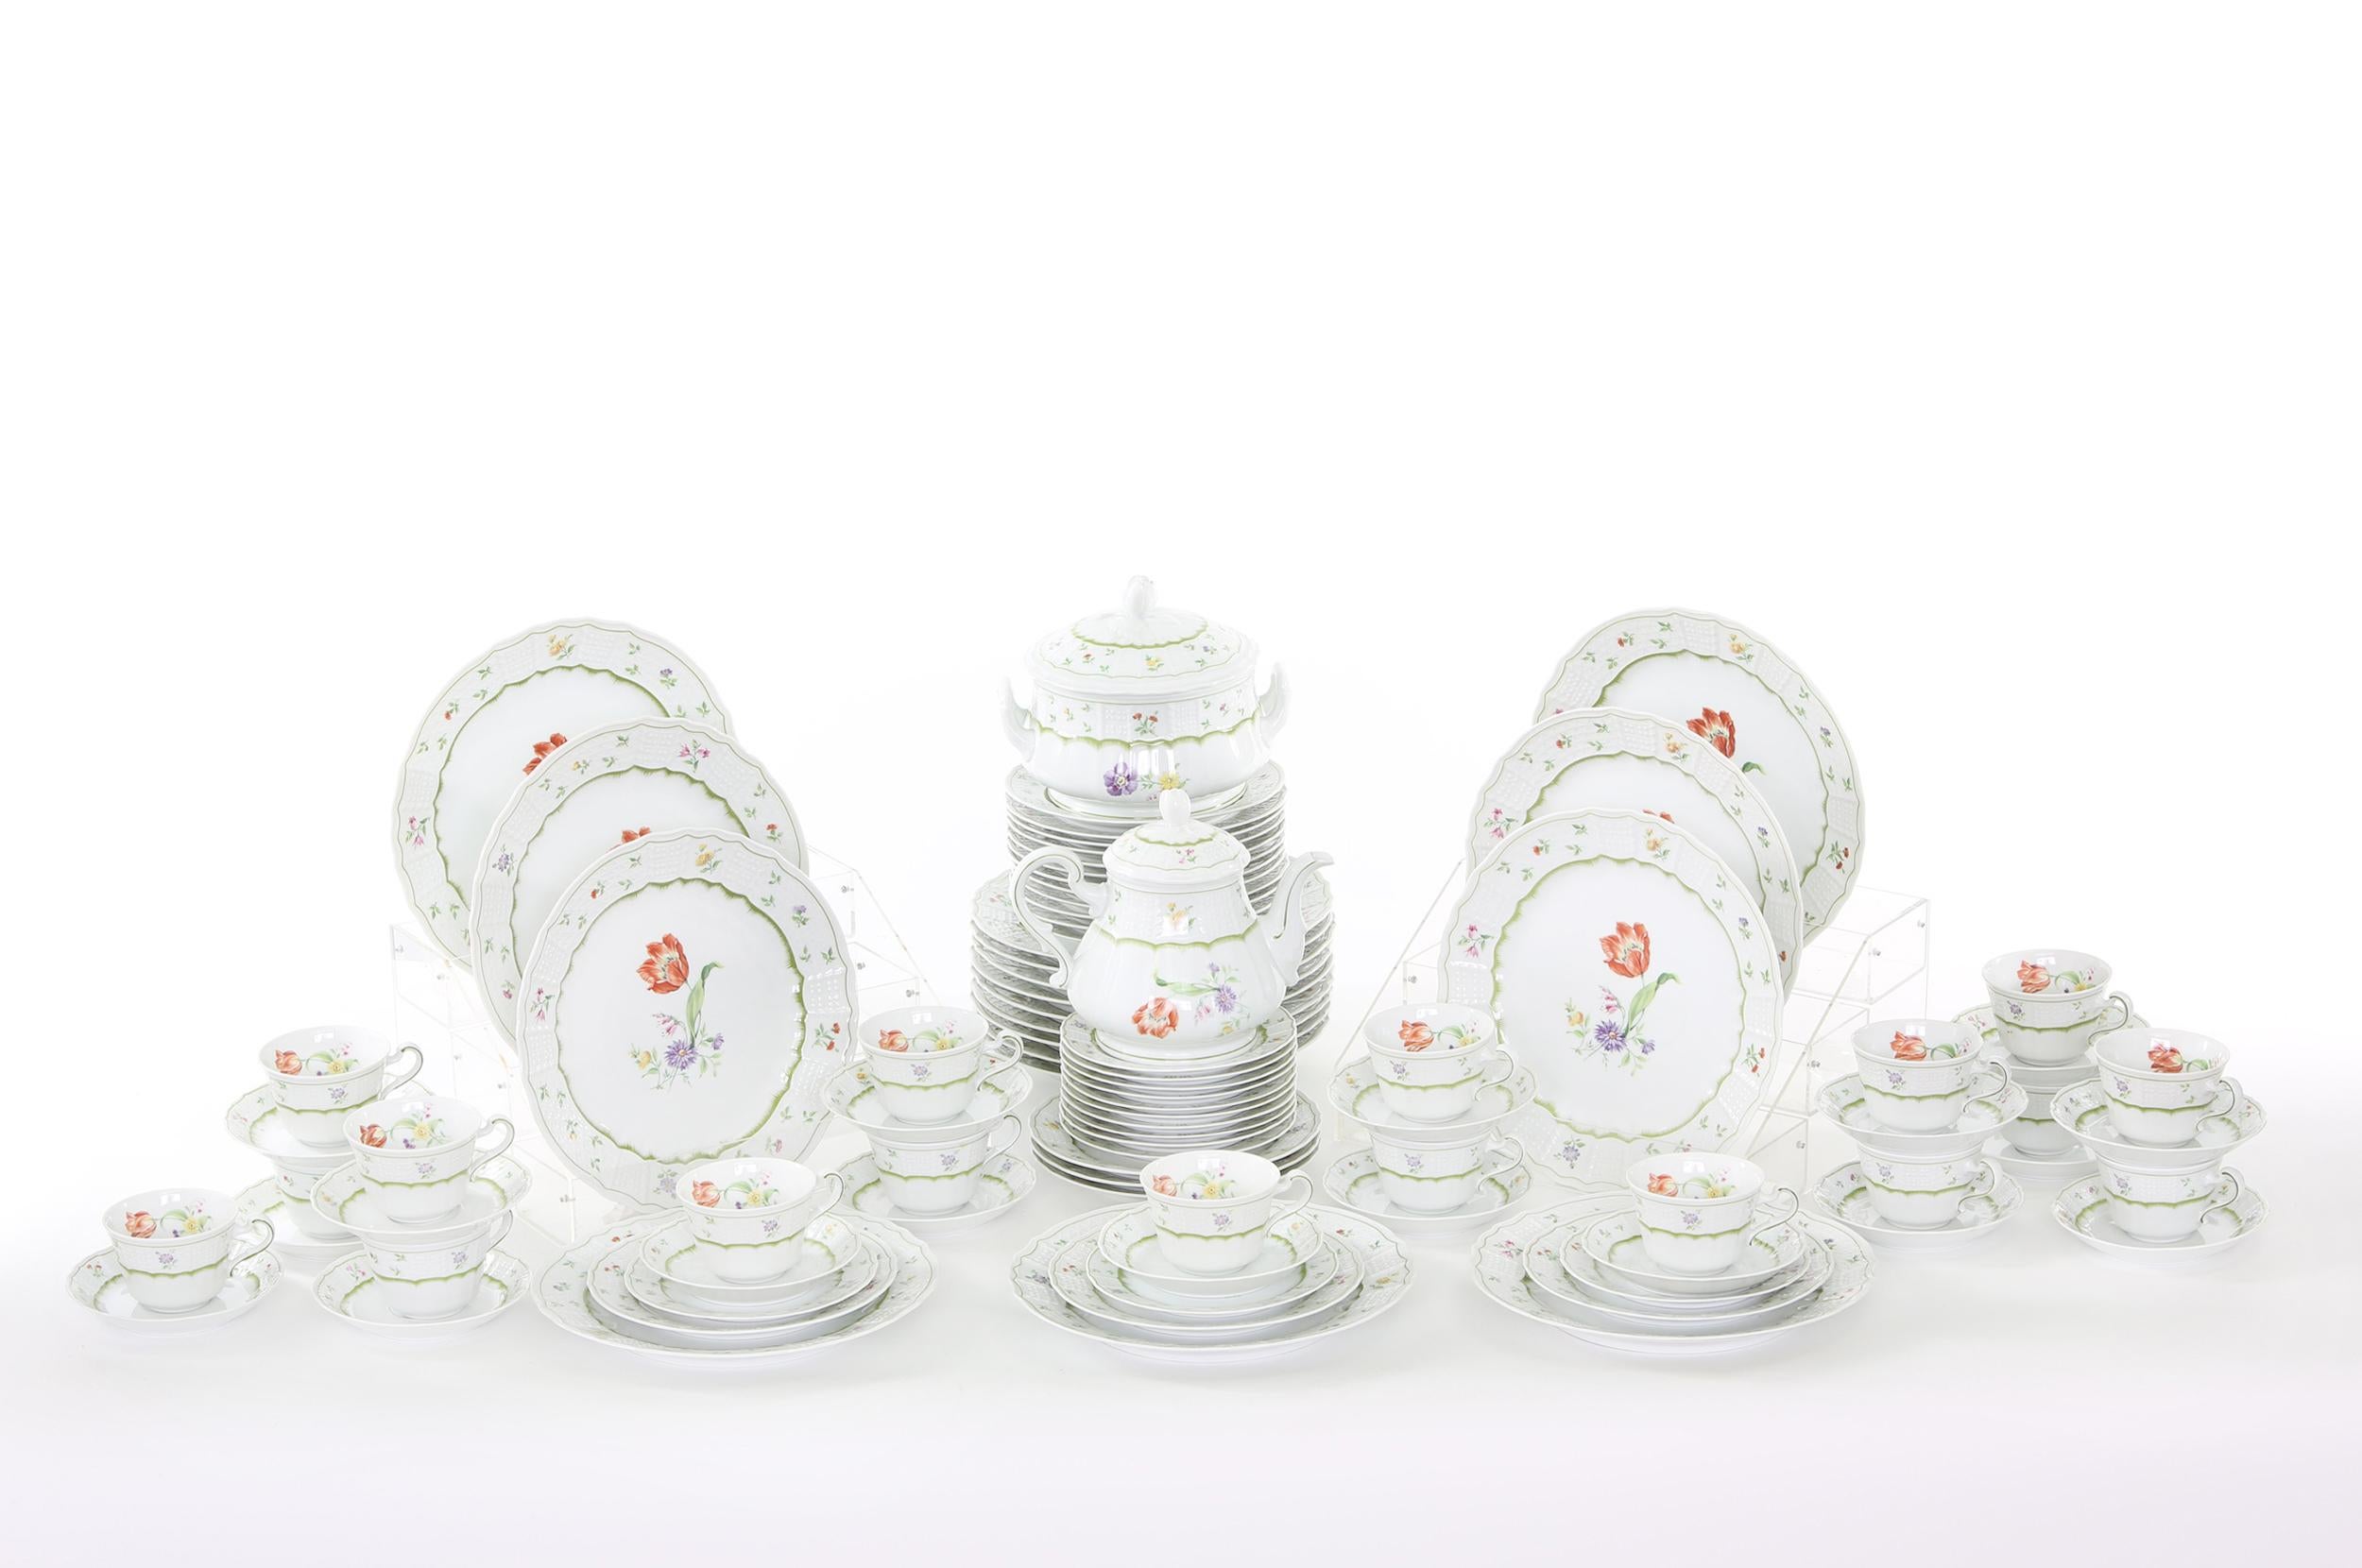 German porcelain dinnerware service for eighteen people with serving pieces. Each piece is in great condition. Maker's mark undersigned 